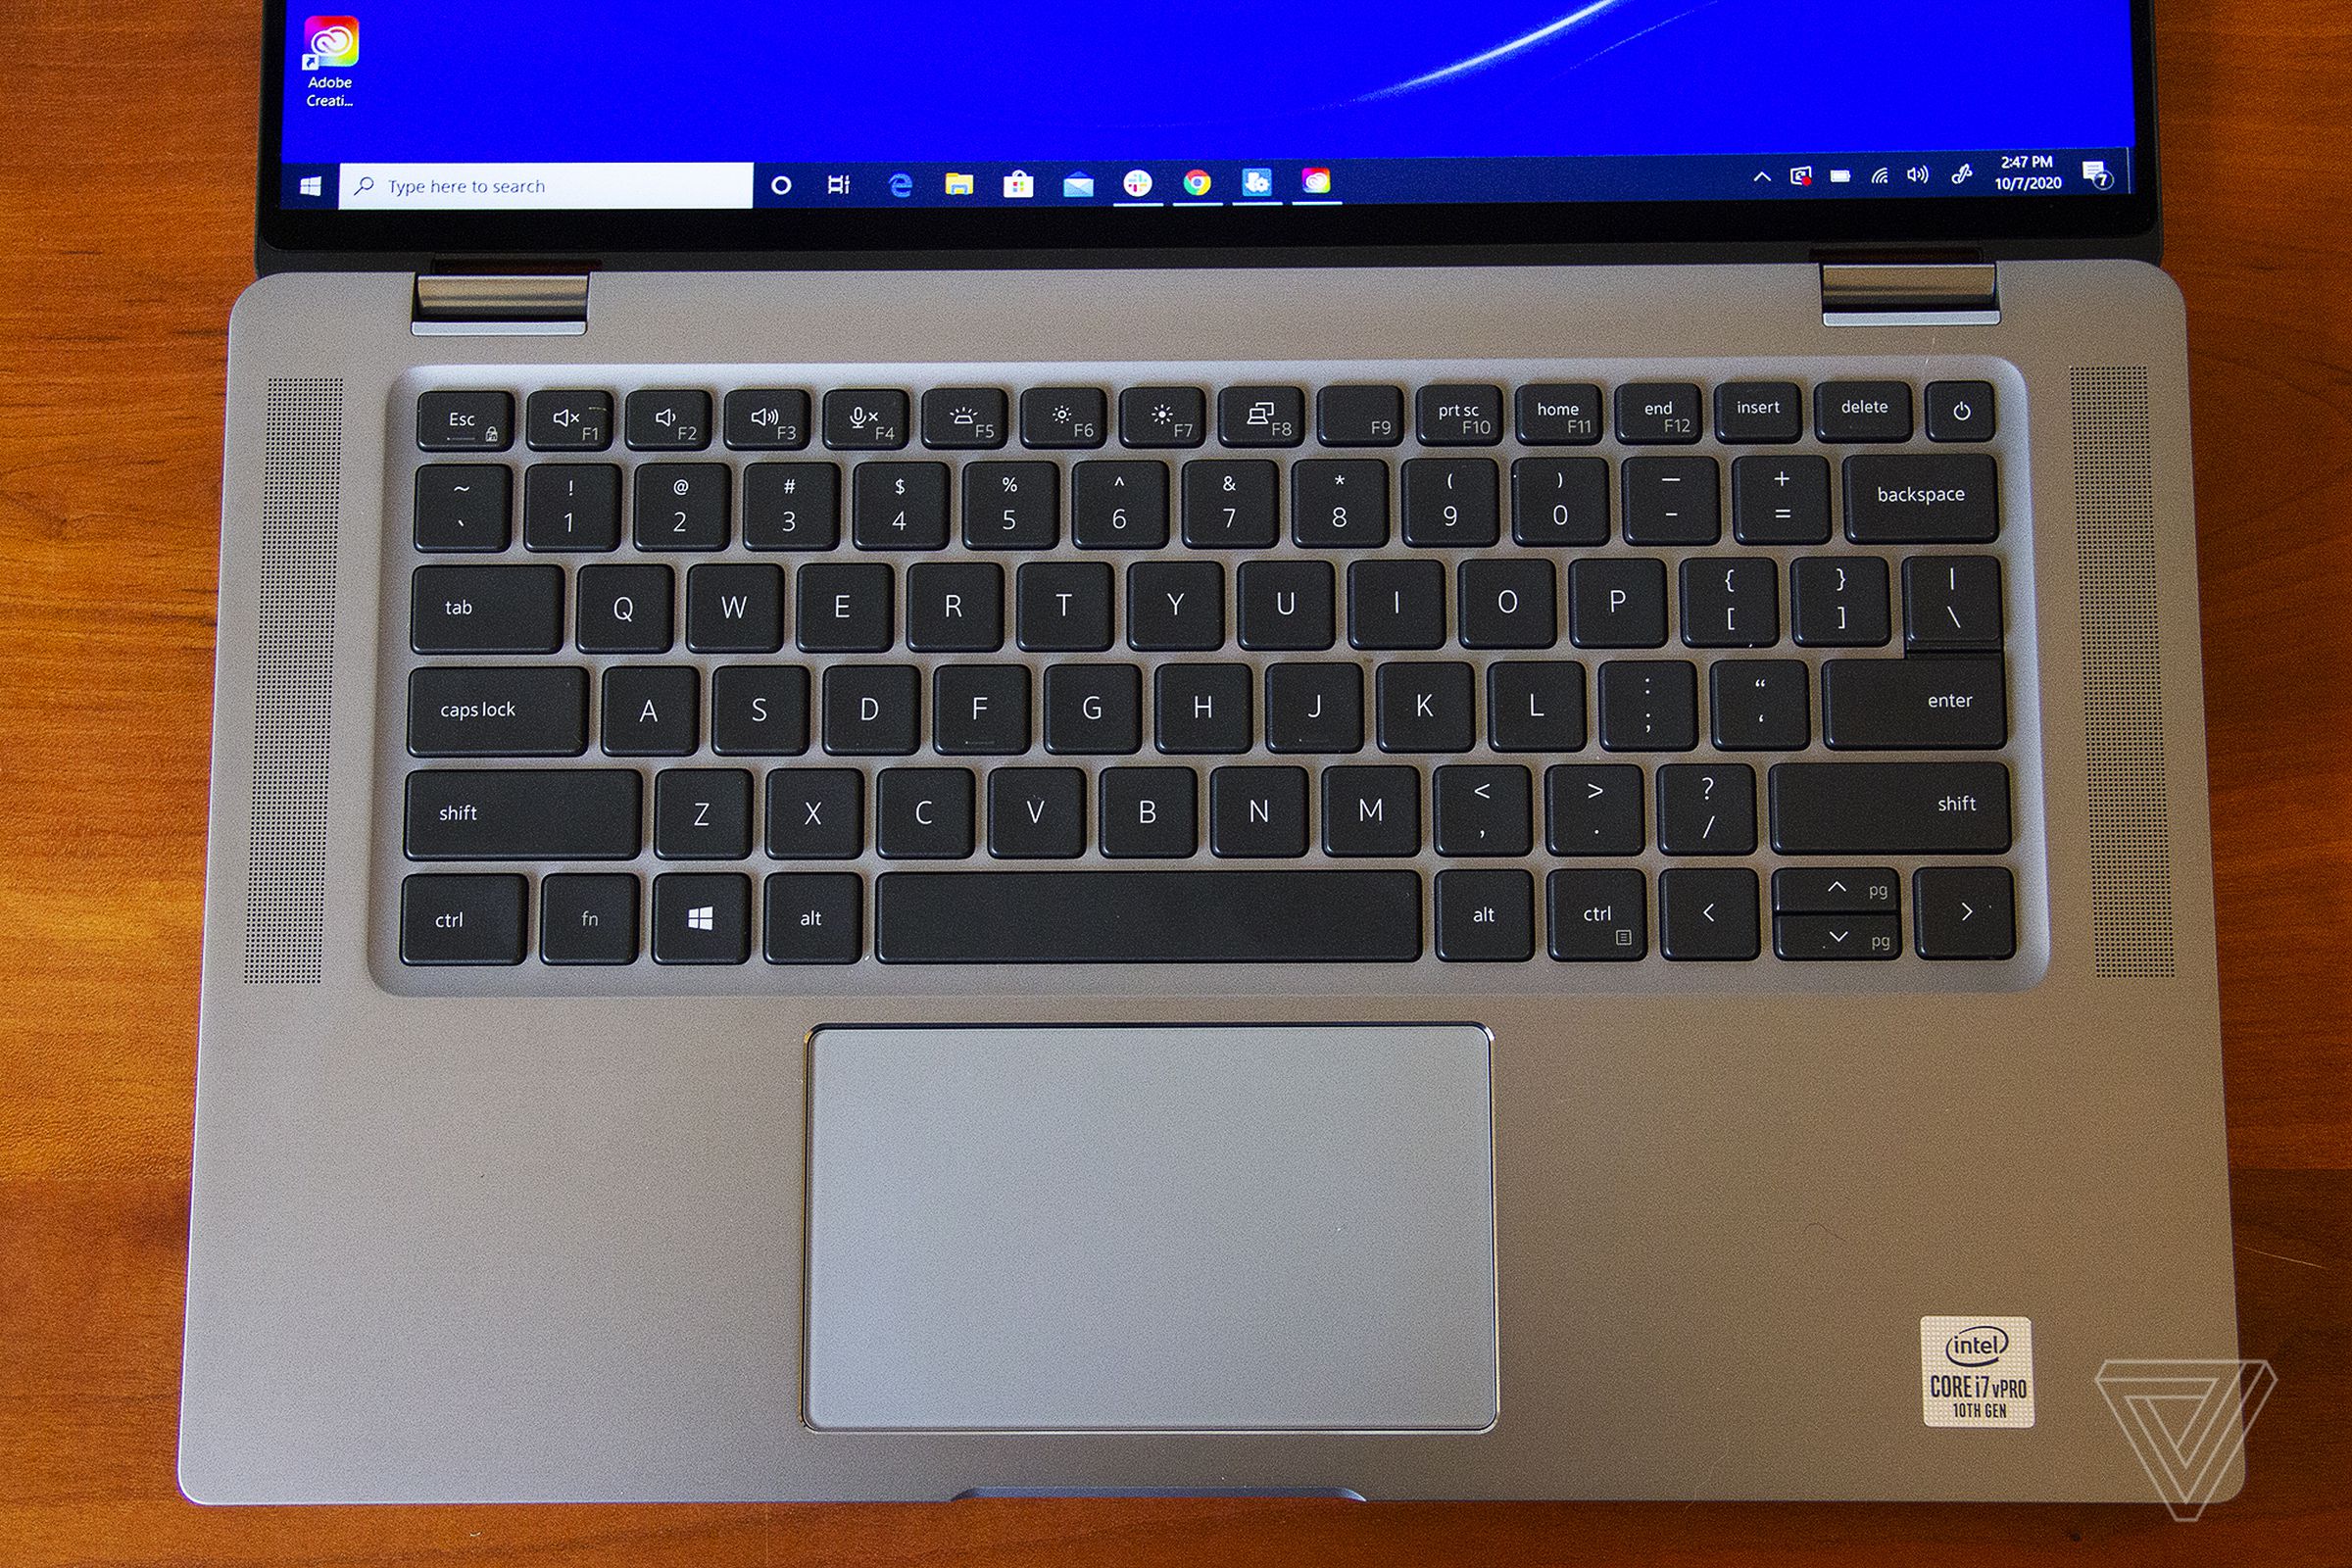 The keyboard deck of the Dell Latitude 9510 2-in-1 seen from above.